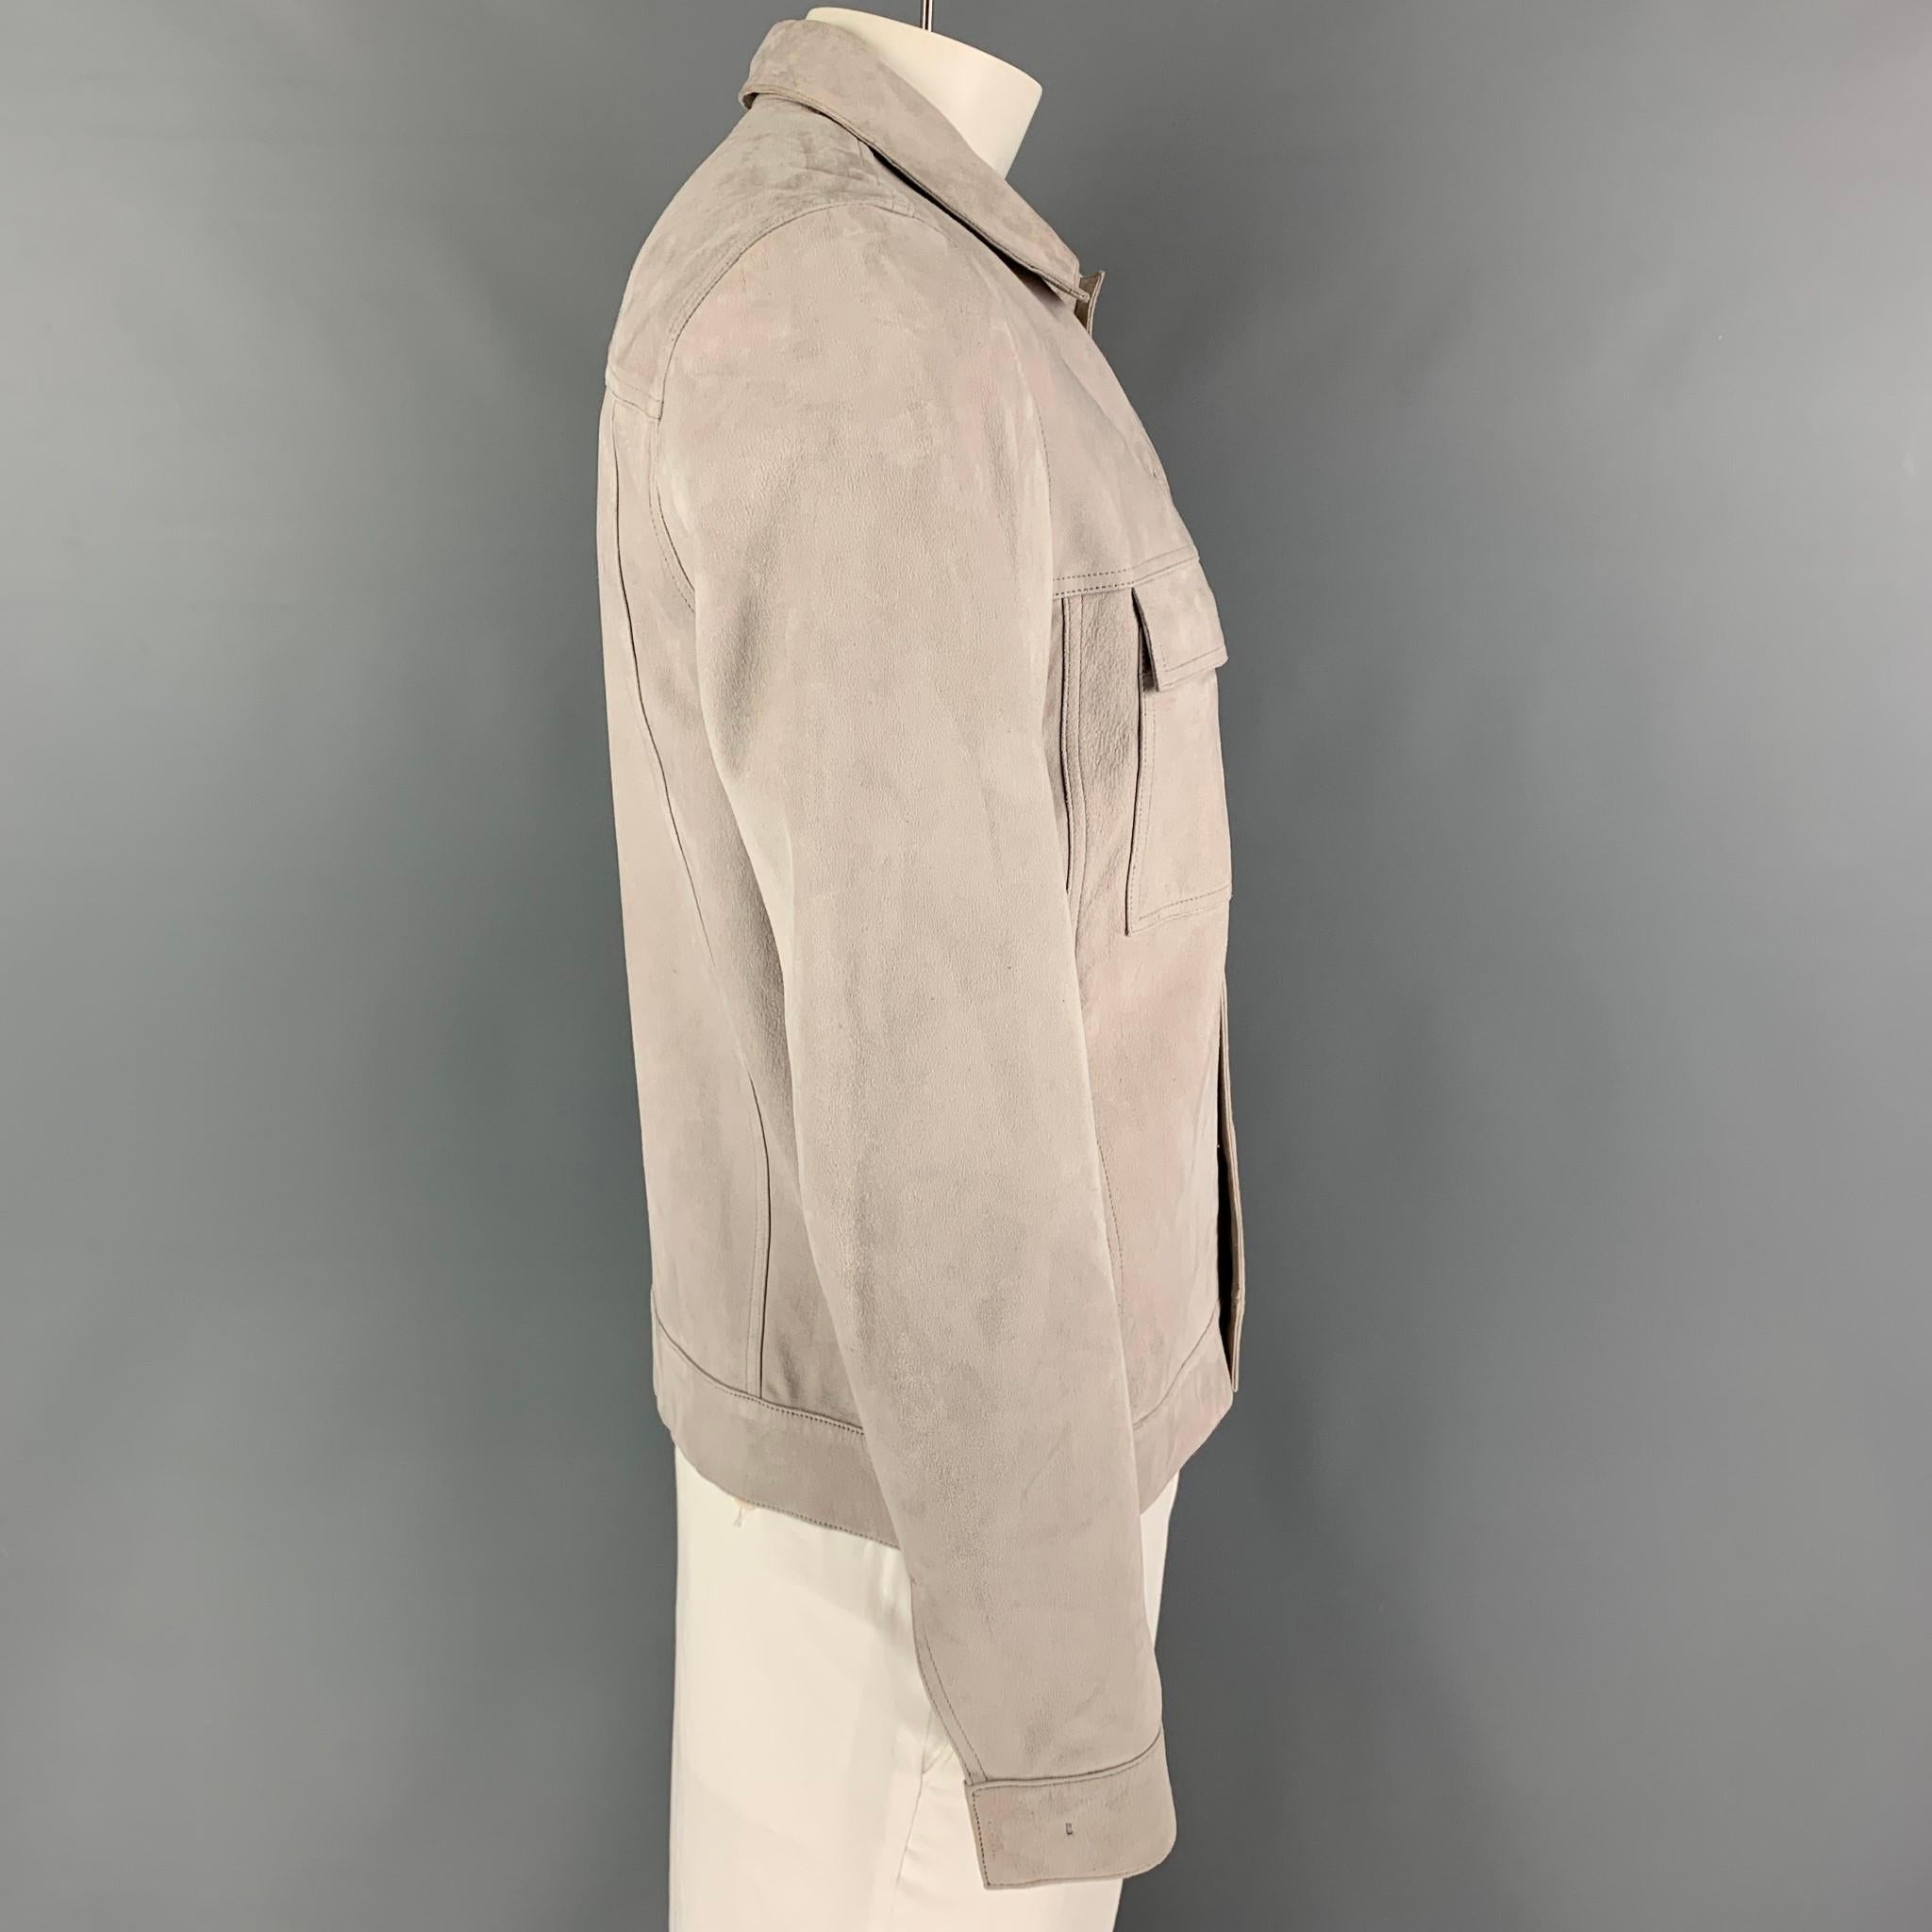 THEORY jacket comes in a grey suede with a full liner featuring a pointed collar, flap pockets, and a snap button closure. 

Good Pre-Owned Condition. Moderate discoloration. As-is.
Marked: L

Measurements:

Shoulder: 18 in.
Chest: 40 in.
Sleeve: